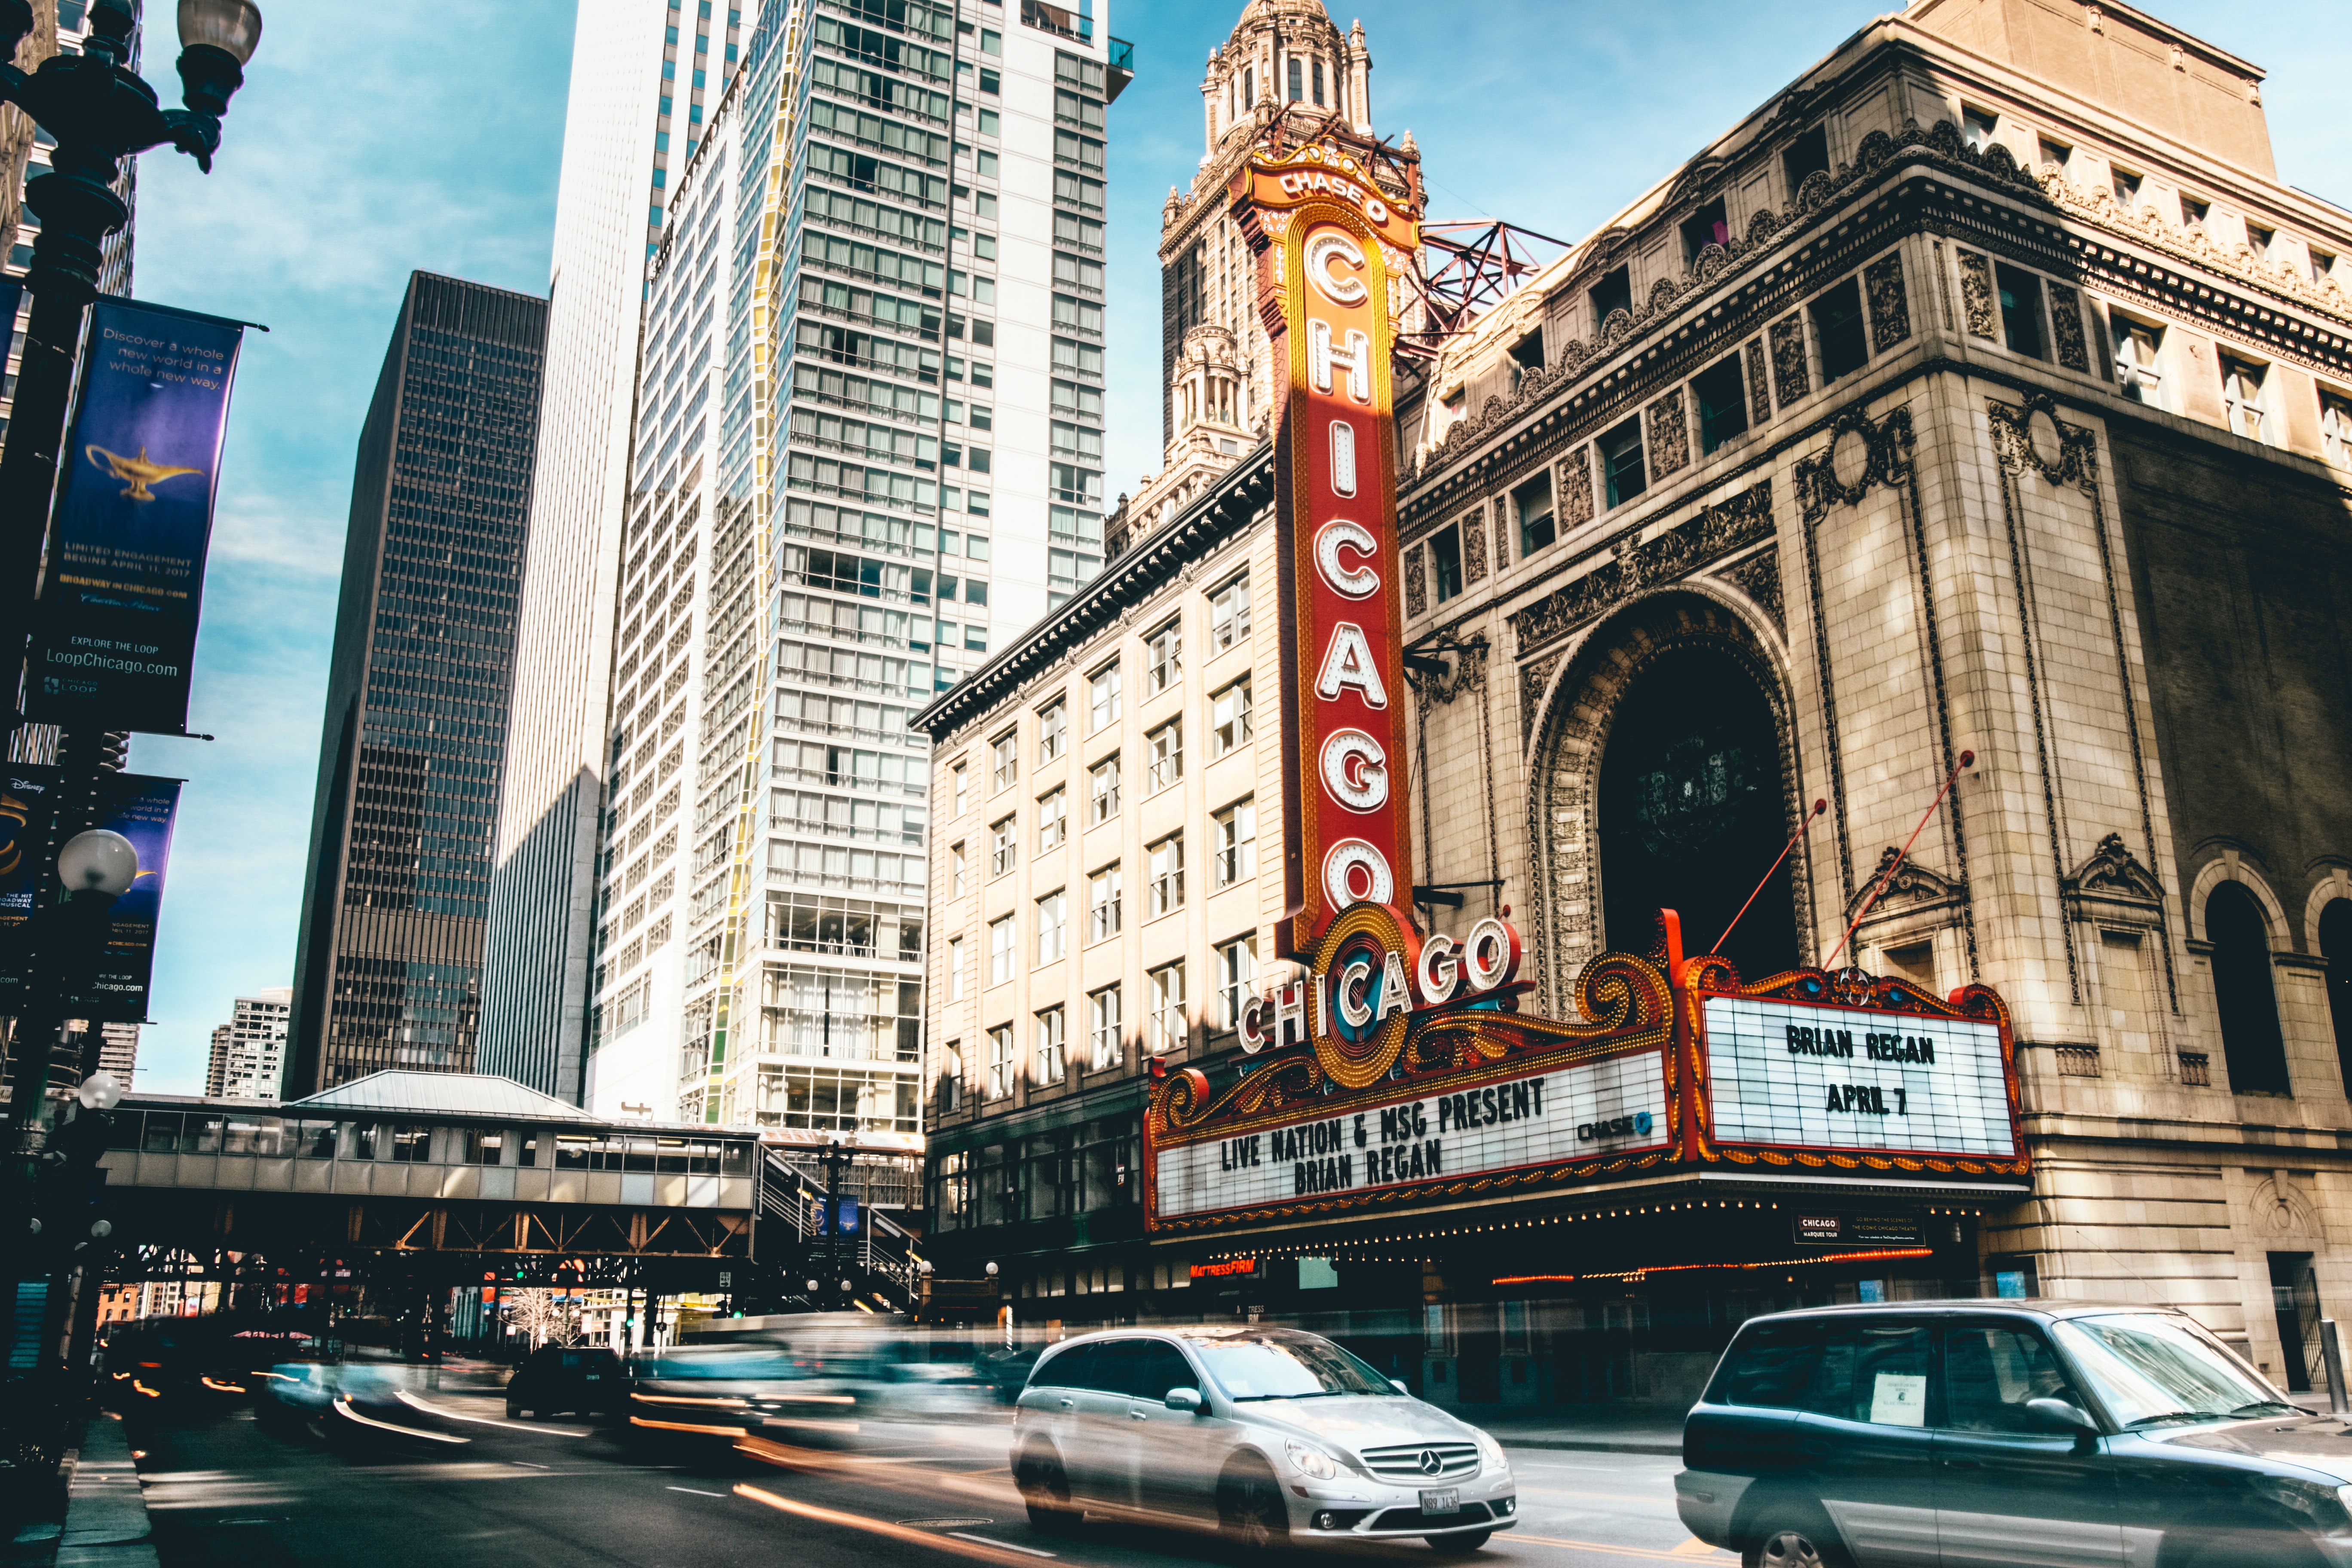 5 Things to do in Chicago